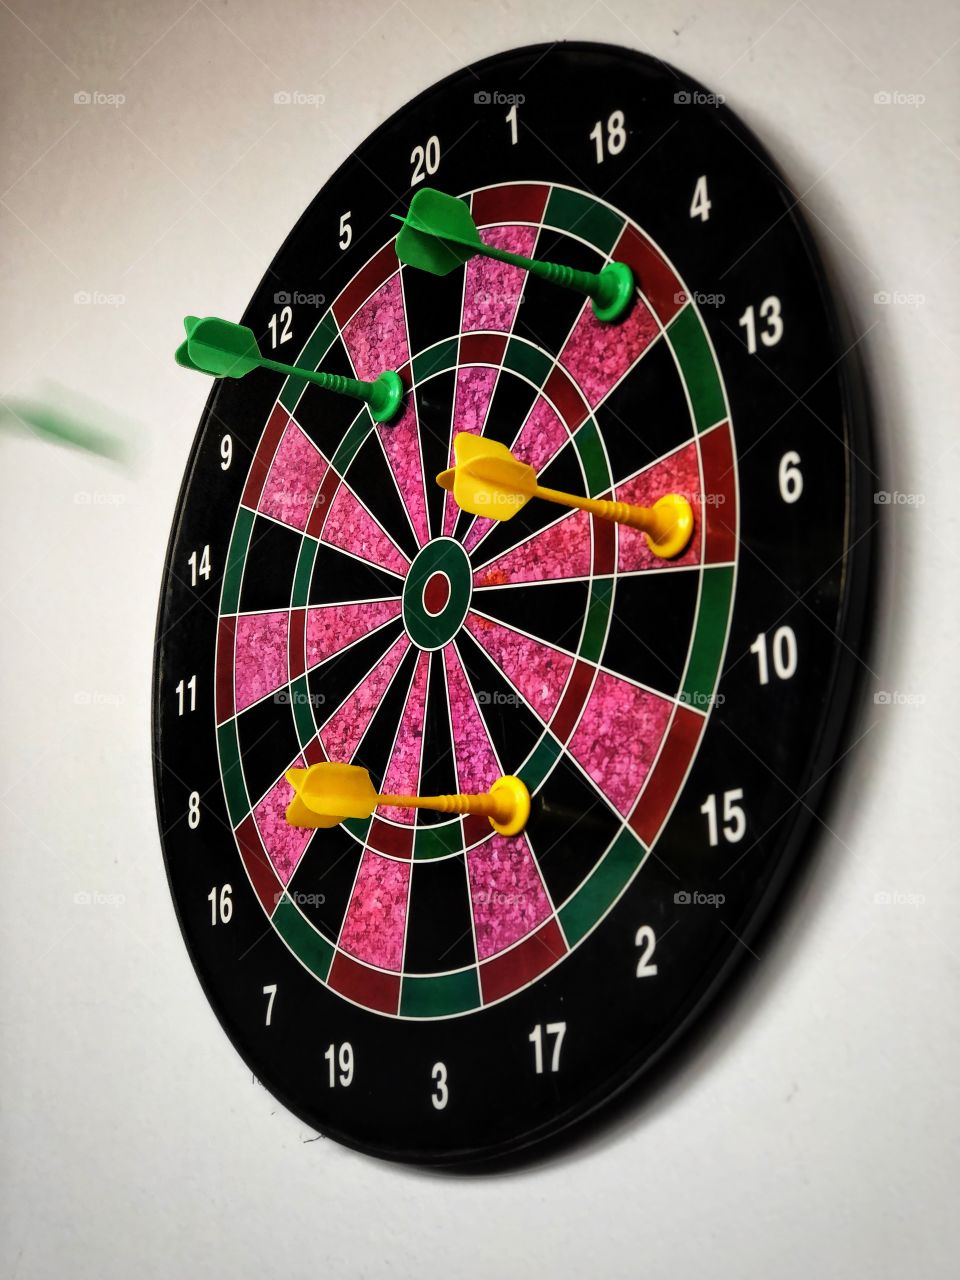 A magnetic dart board... A game full of circles, and the big challenge to get to the smallest one. Lots of fun! Do you think the green dart coming to the board will reach the central circle?